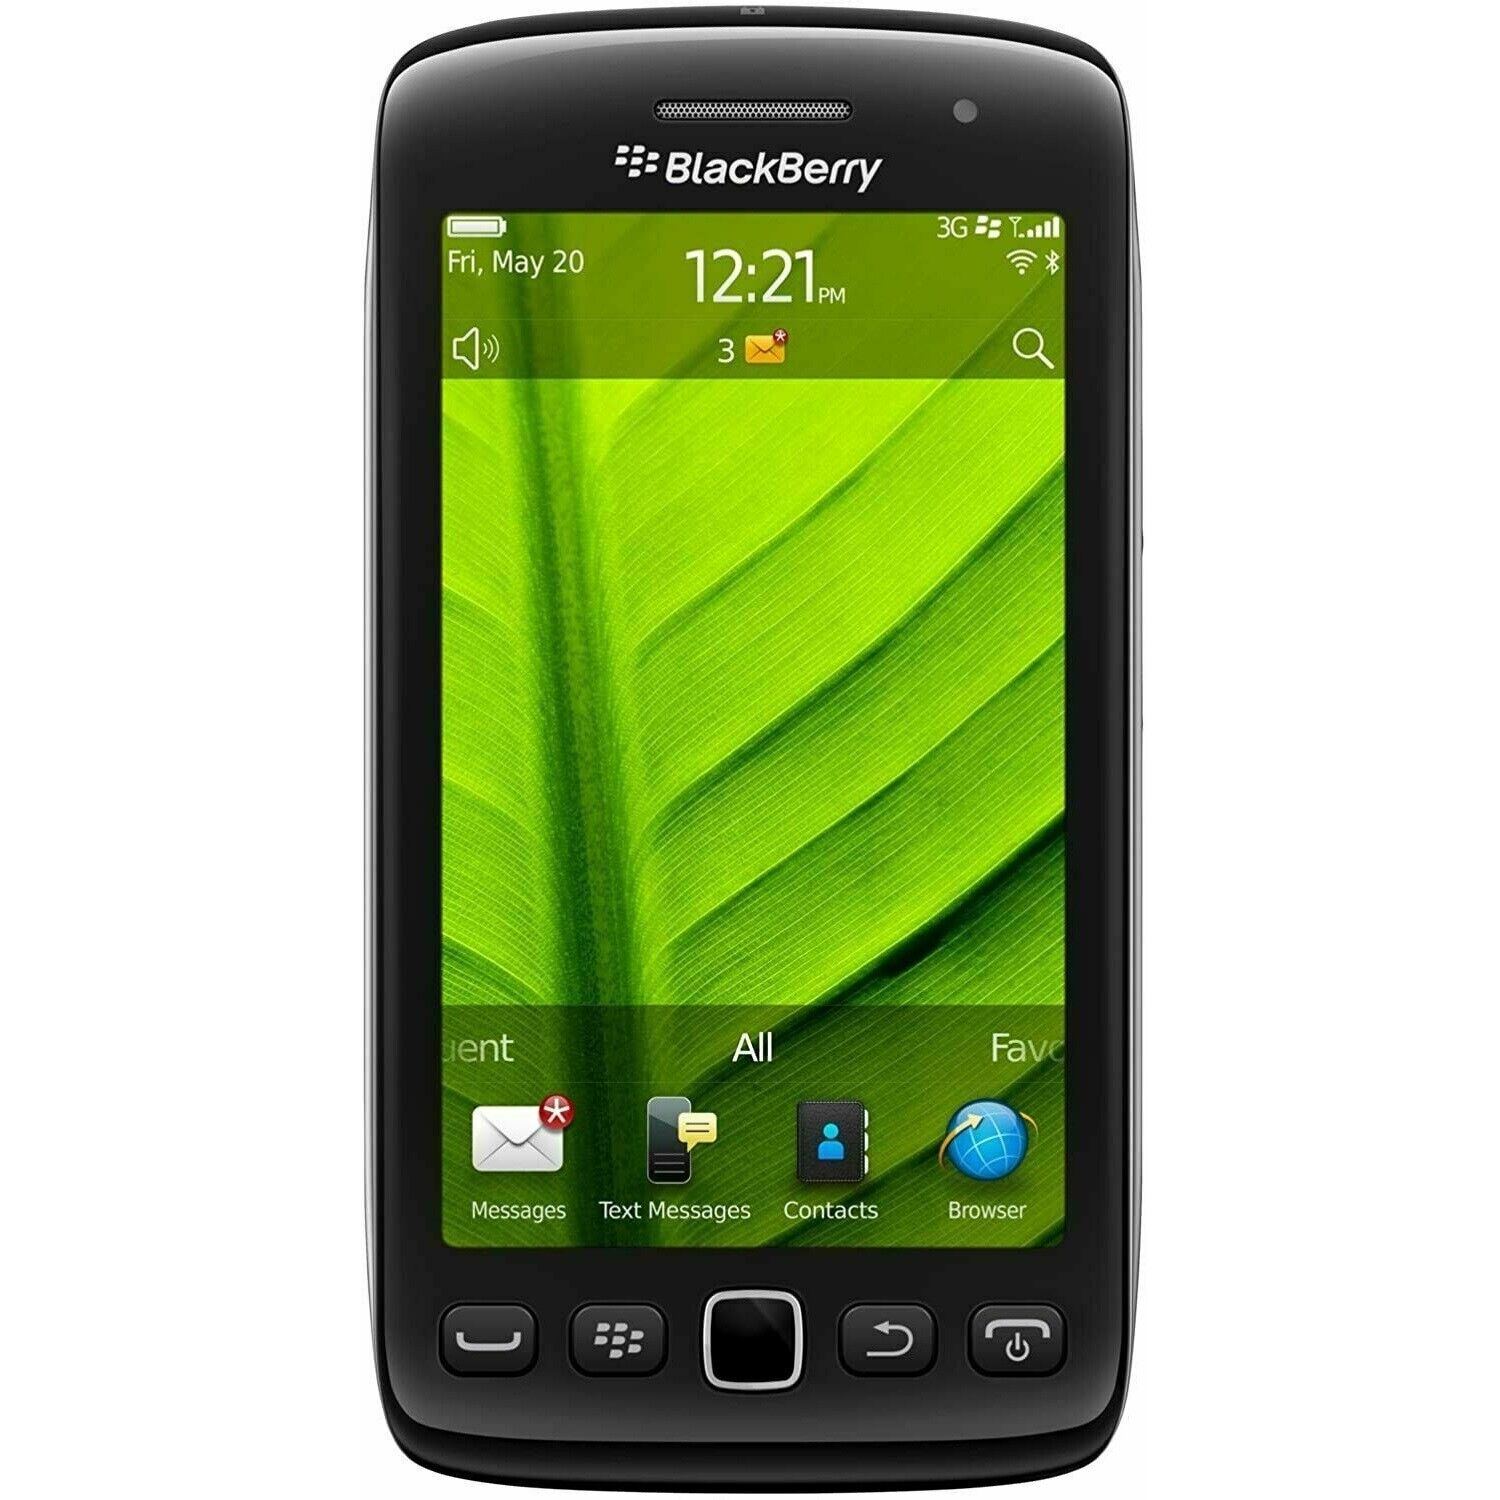 NEW BlackBerry Torch 9860 - Black (Unlocked) GSM 3G WiFi Camera Touch Smartphone